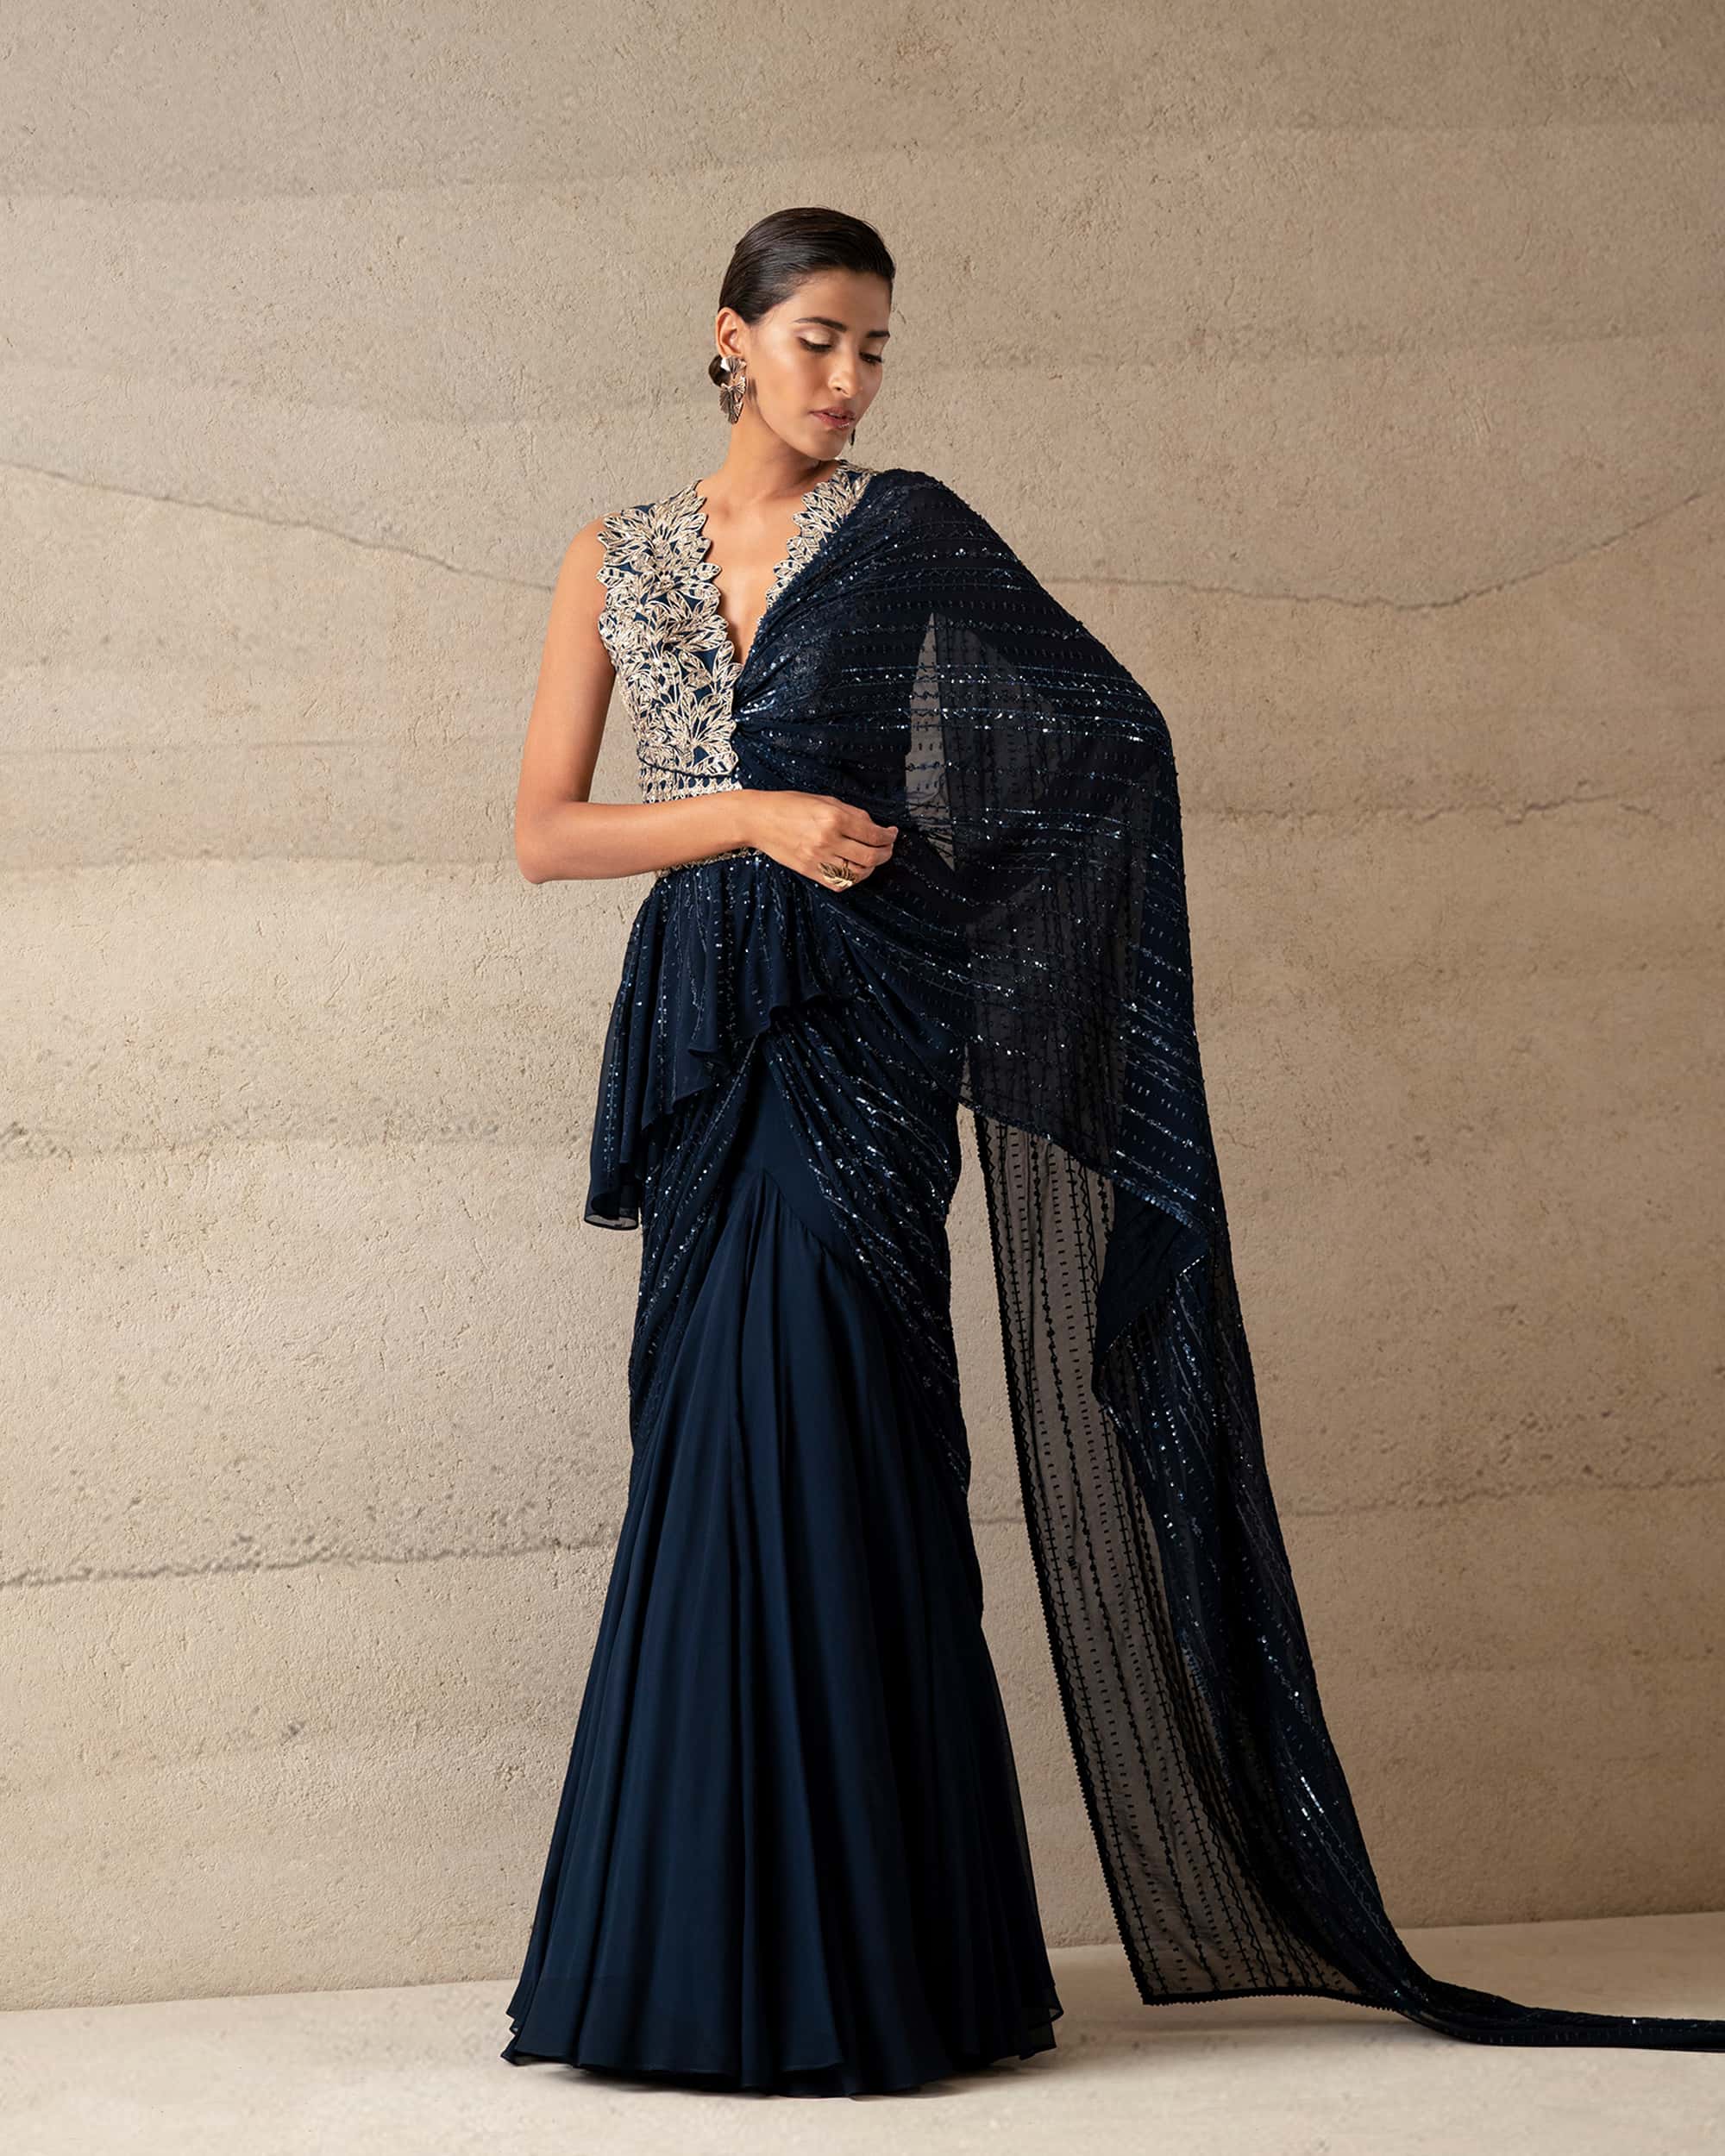 Bollywood Celebs Sharing Some Major OTT Cocktail Saree Inspirations |  Cocktail party outfit, Party outfit, Reception dress